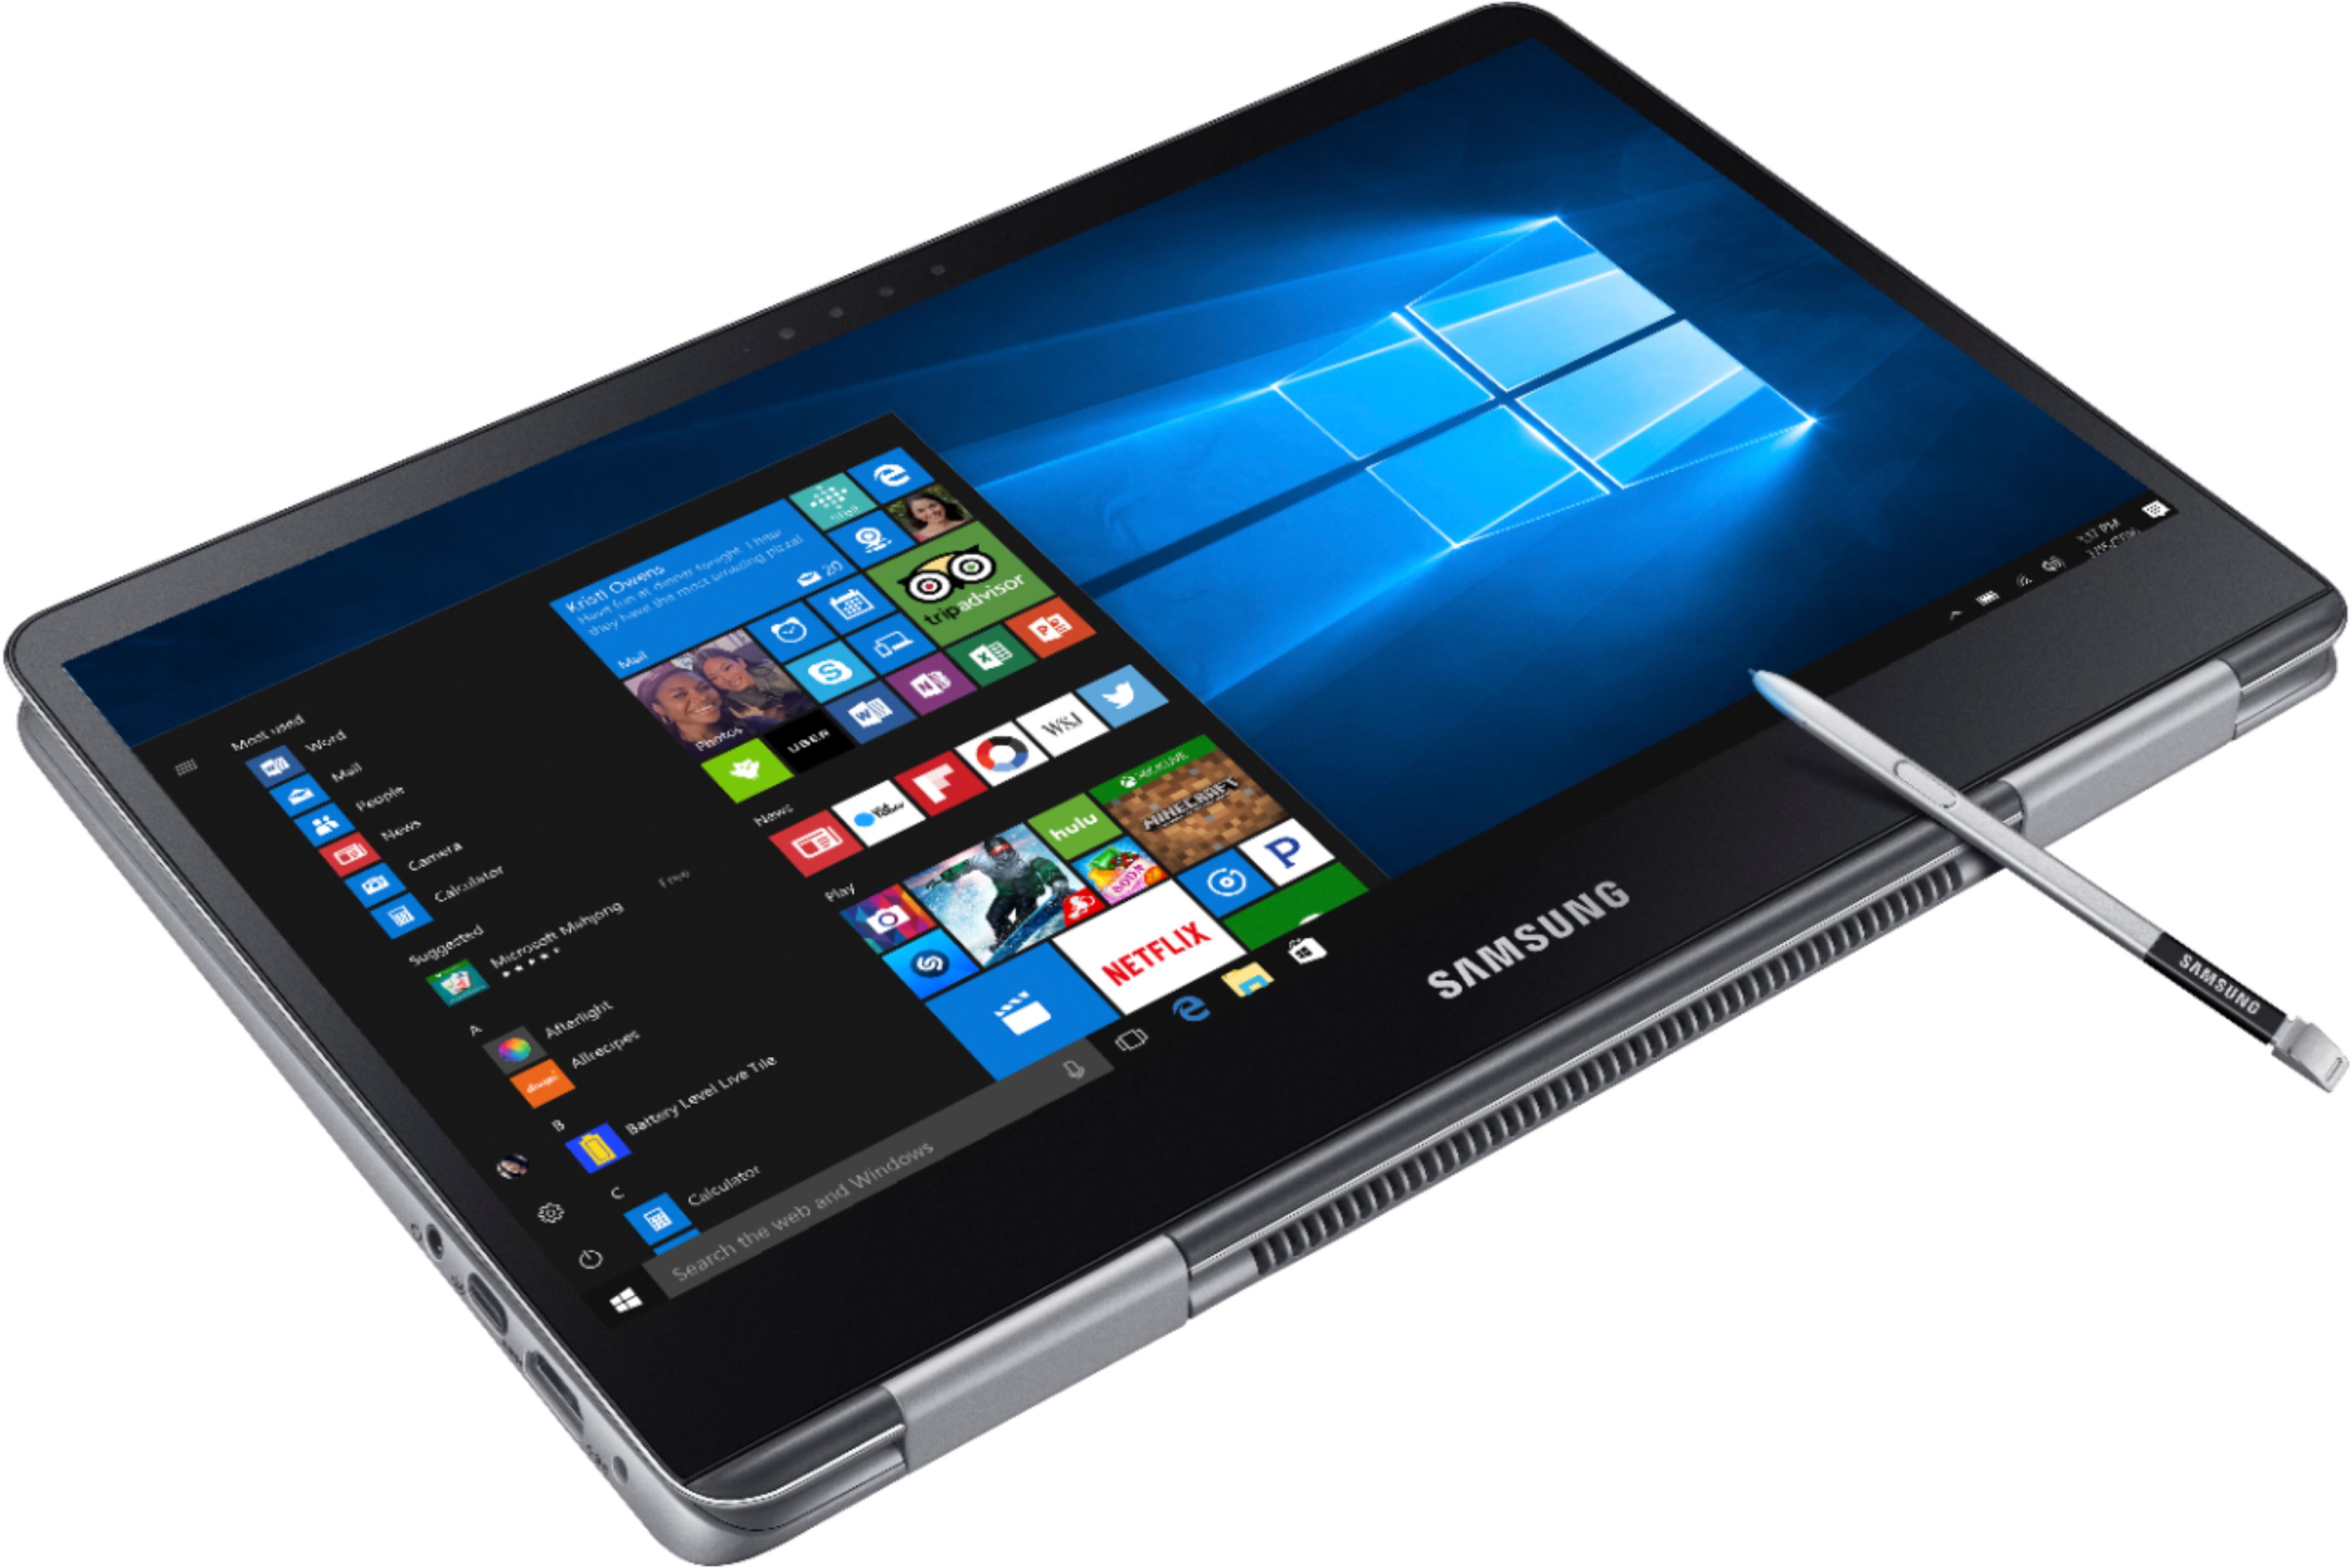 Samsung Notebook 9 Pro 13 3 Touch Screen Laptop Intel Core i7 8GB  